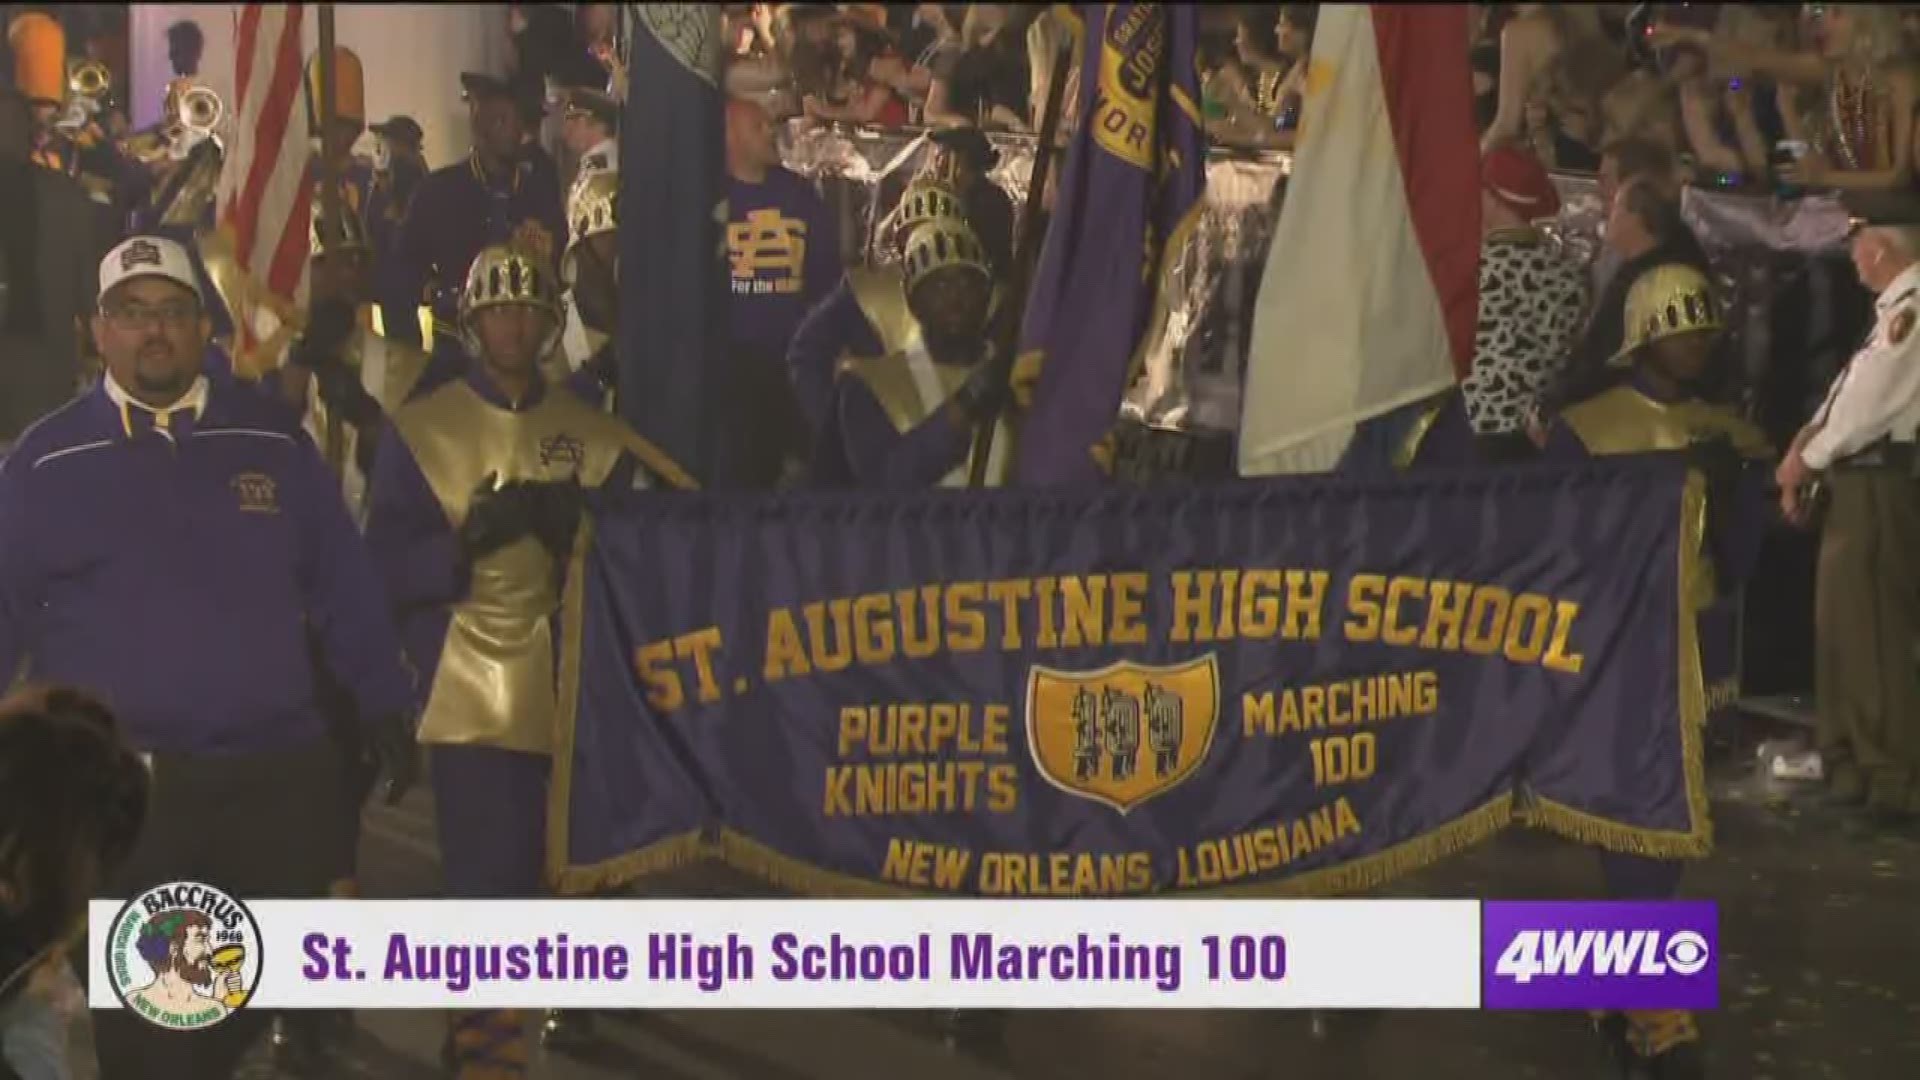 St. Augustine High School's famed 'Marching 100' band from New Orleans - a fixture in the top Mardi Gras parades every year!